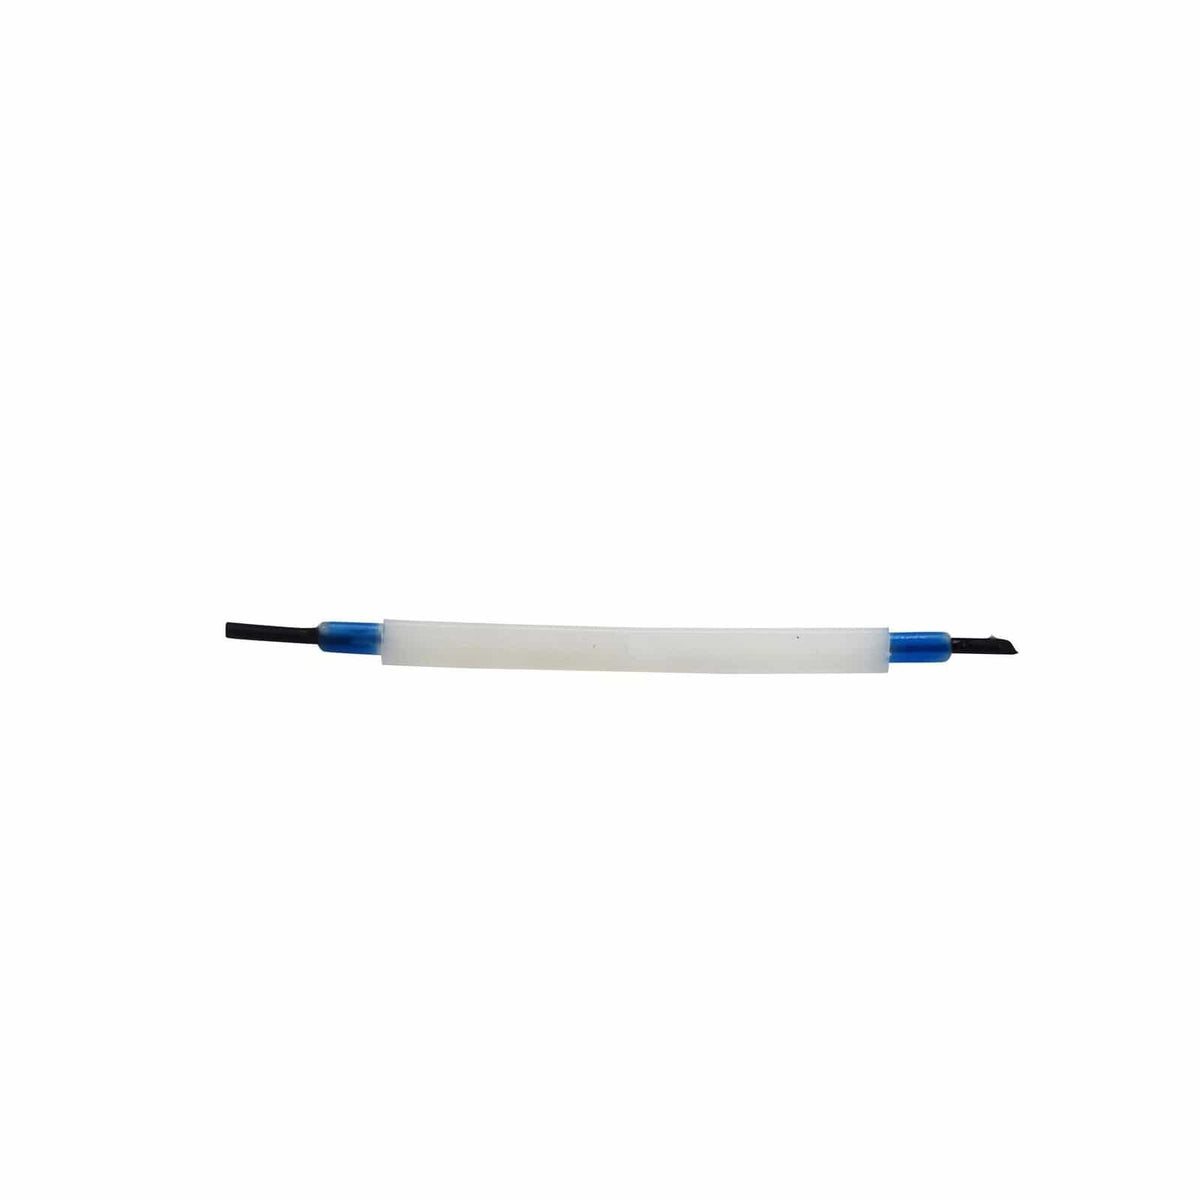 Sayco Surgical Instruments 11cm / Straight Sayco Disposable Probe Rubber Tipped